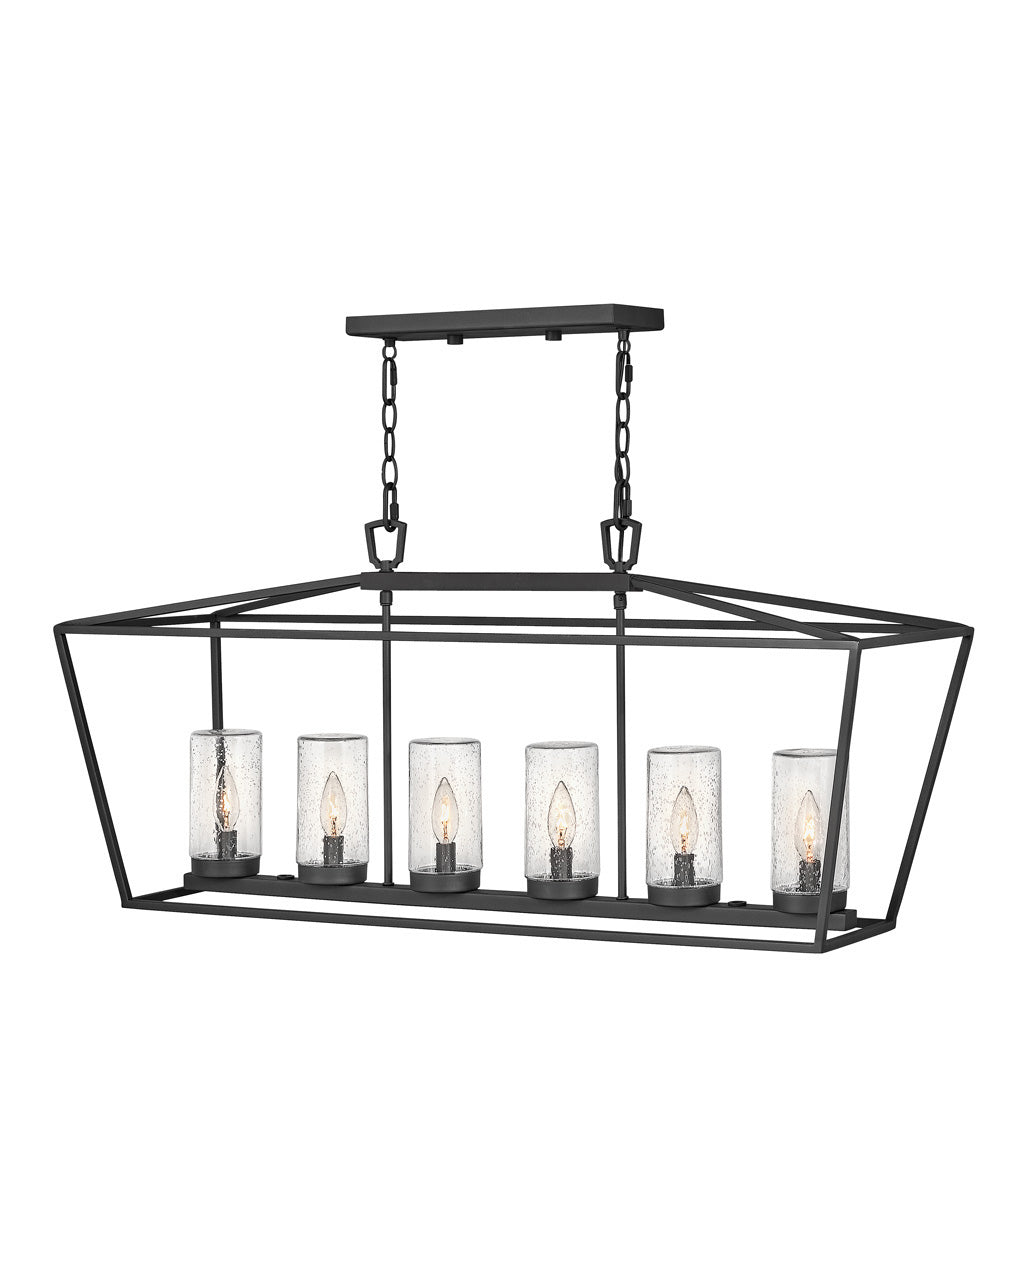 OUTDOOR ALFORD PLACE Light Linear Outdoor l Wall Hinkley Museum Black 12.0x40.0x18.75 